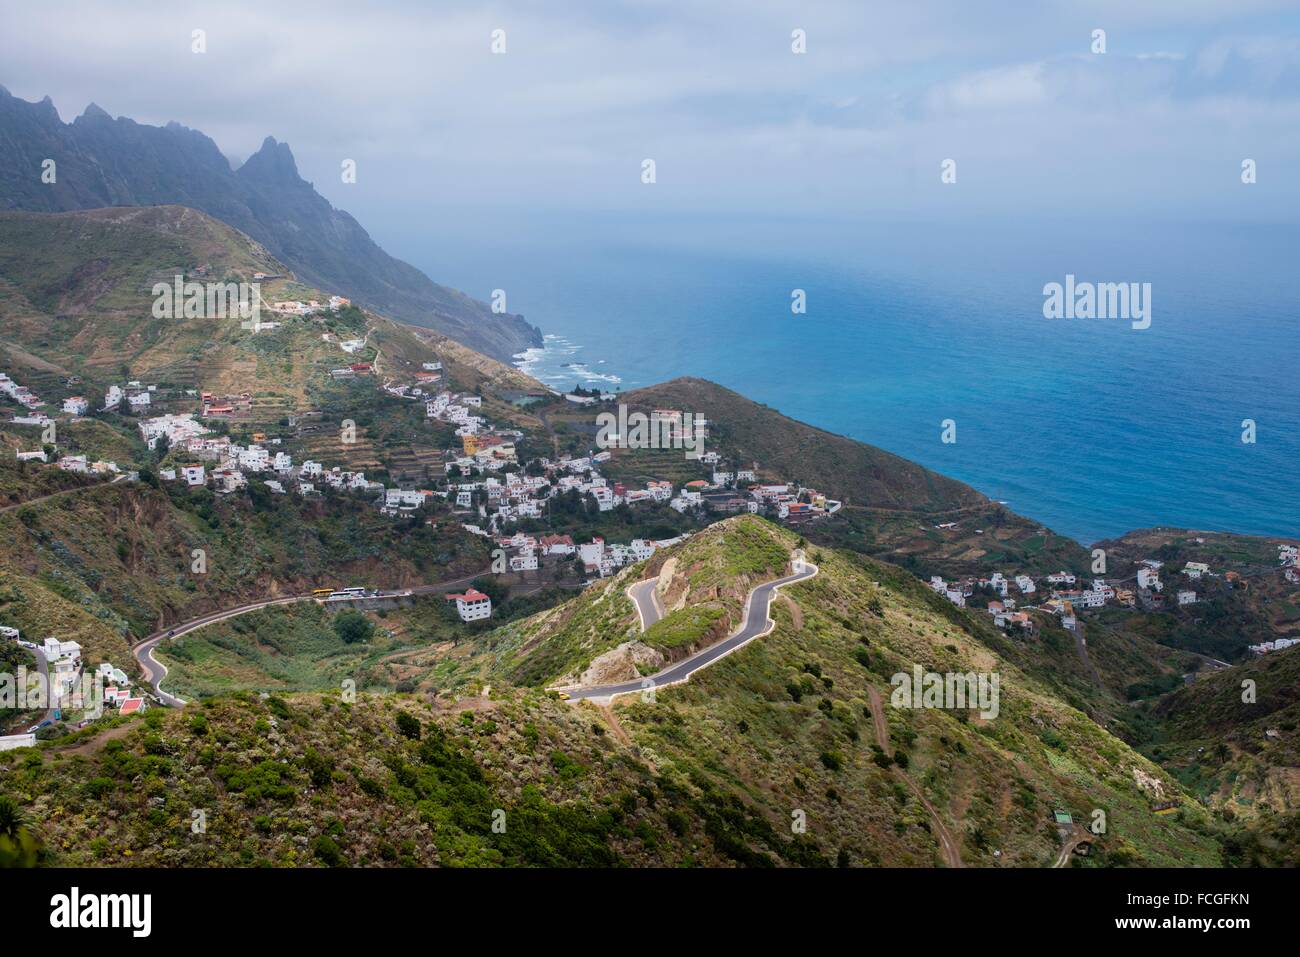 View of the fishermens village of Taganana coastal area in Northern Tenerife, Canary Islands, Spain. Stock Photo